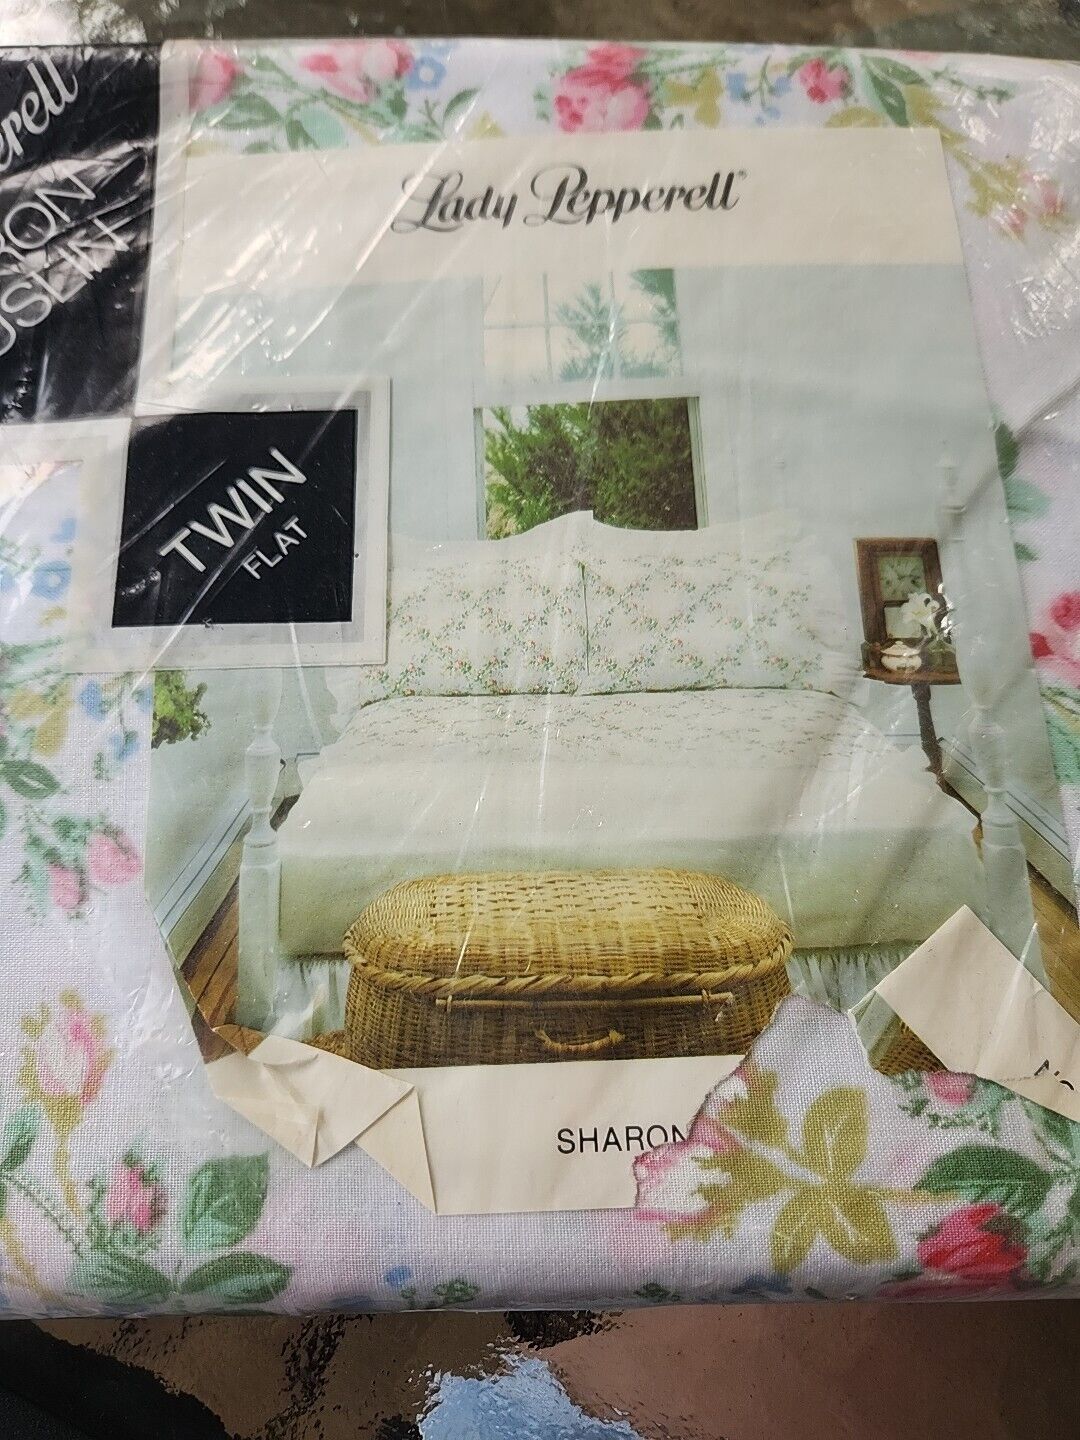 NEW Vintage Lady Pepperell No-Iron Muslin Sheet Twin Flat Floral Sharon Floral